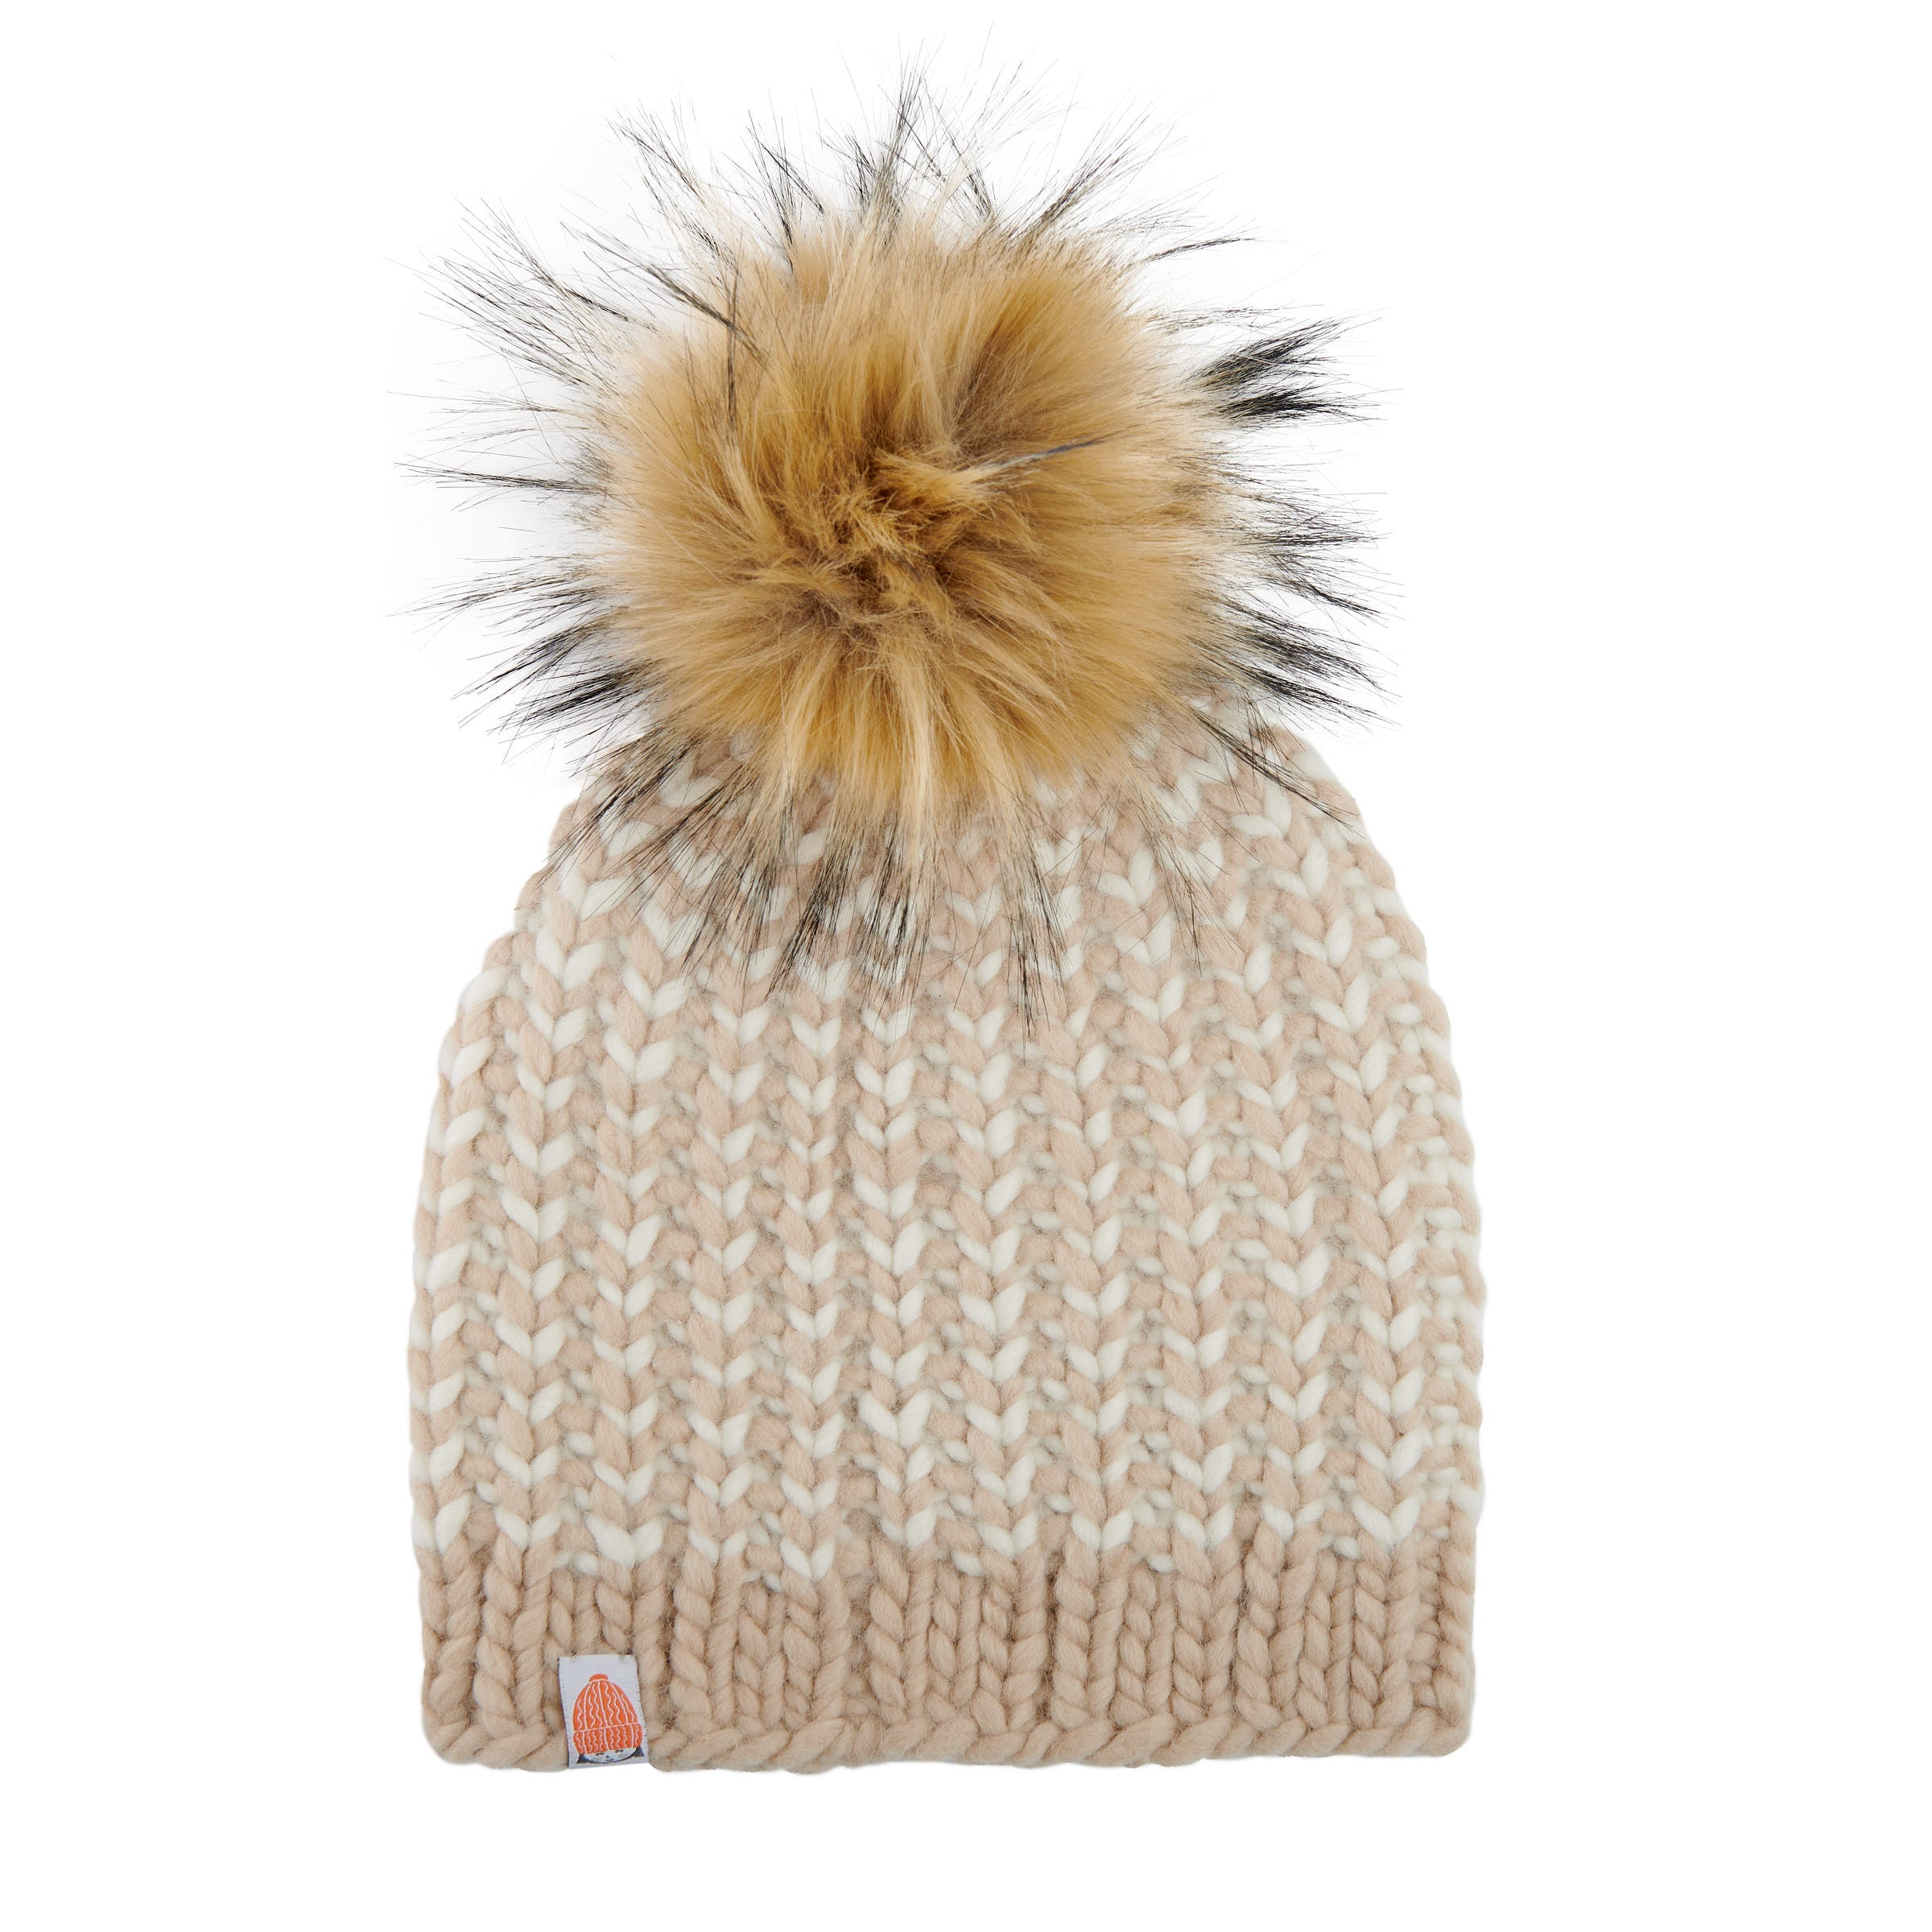 The | Knit Hats | That Winter I Sh*t Foster Beanie